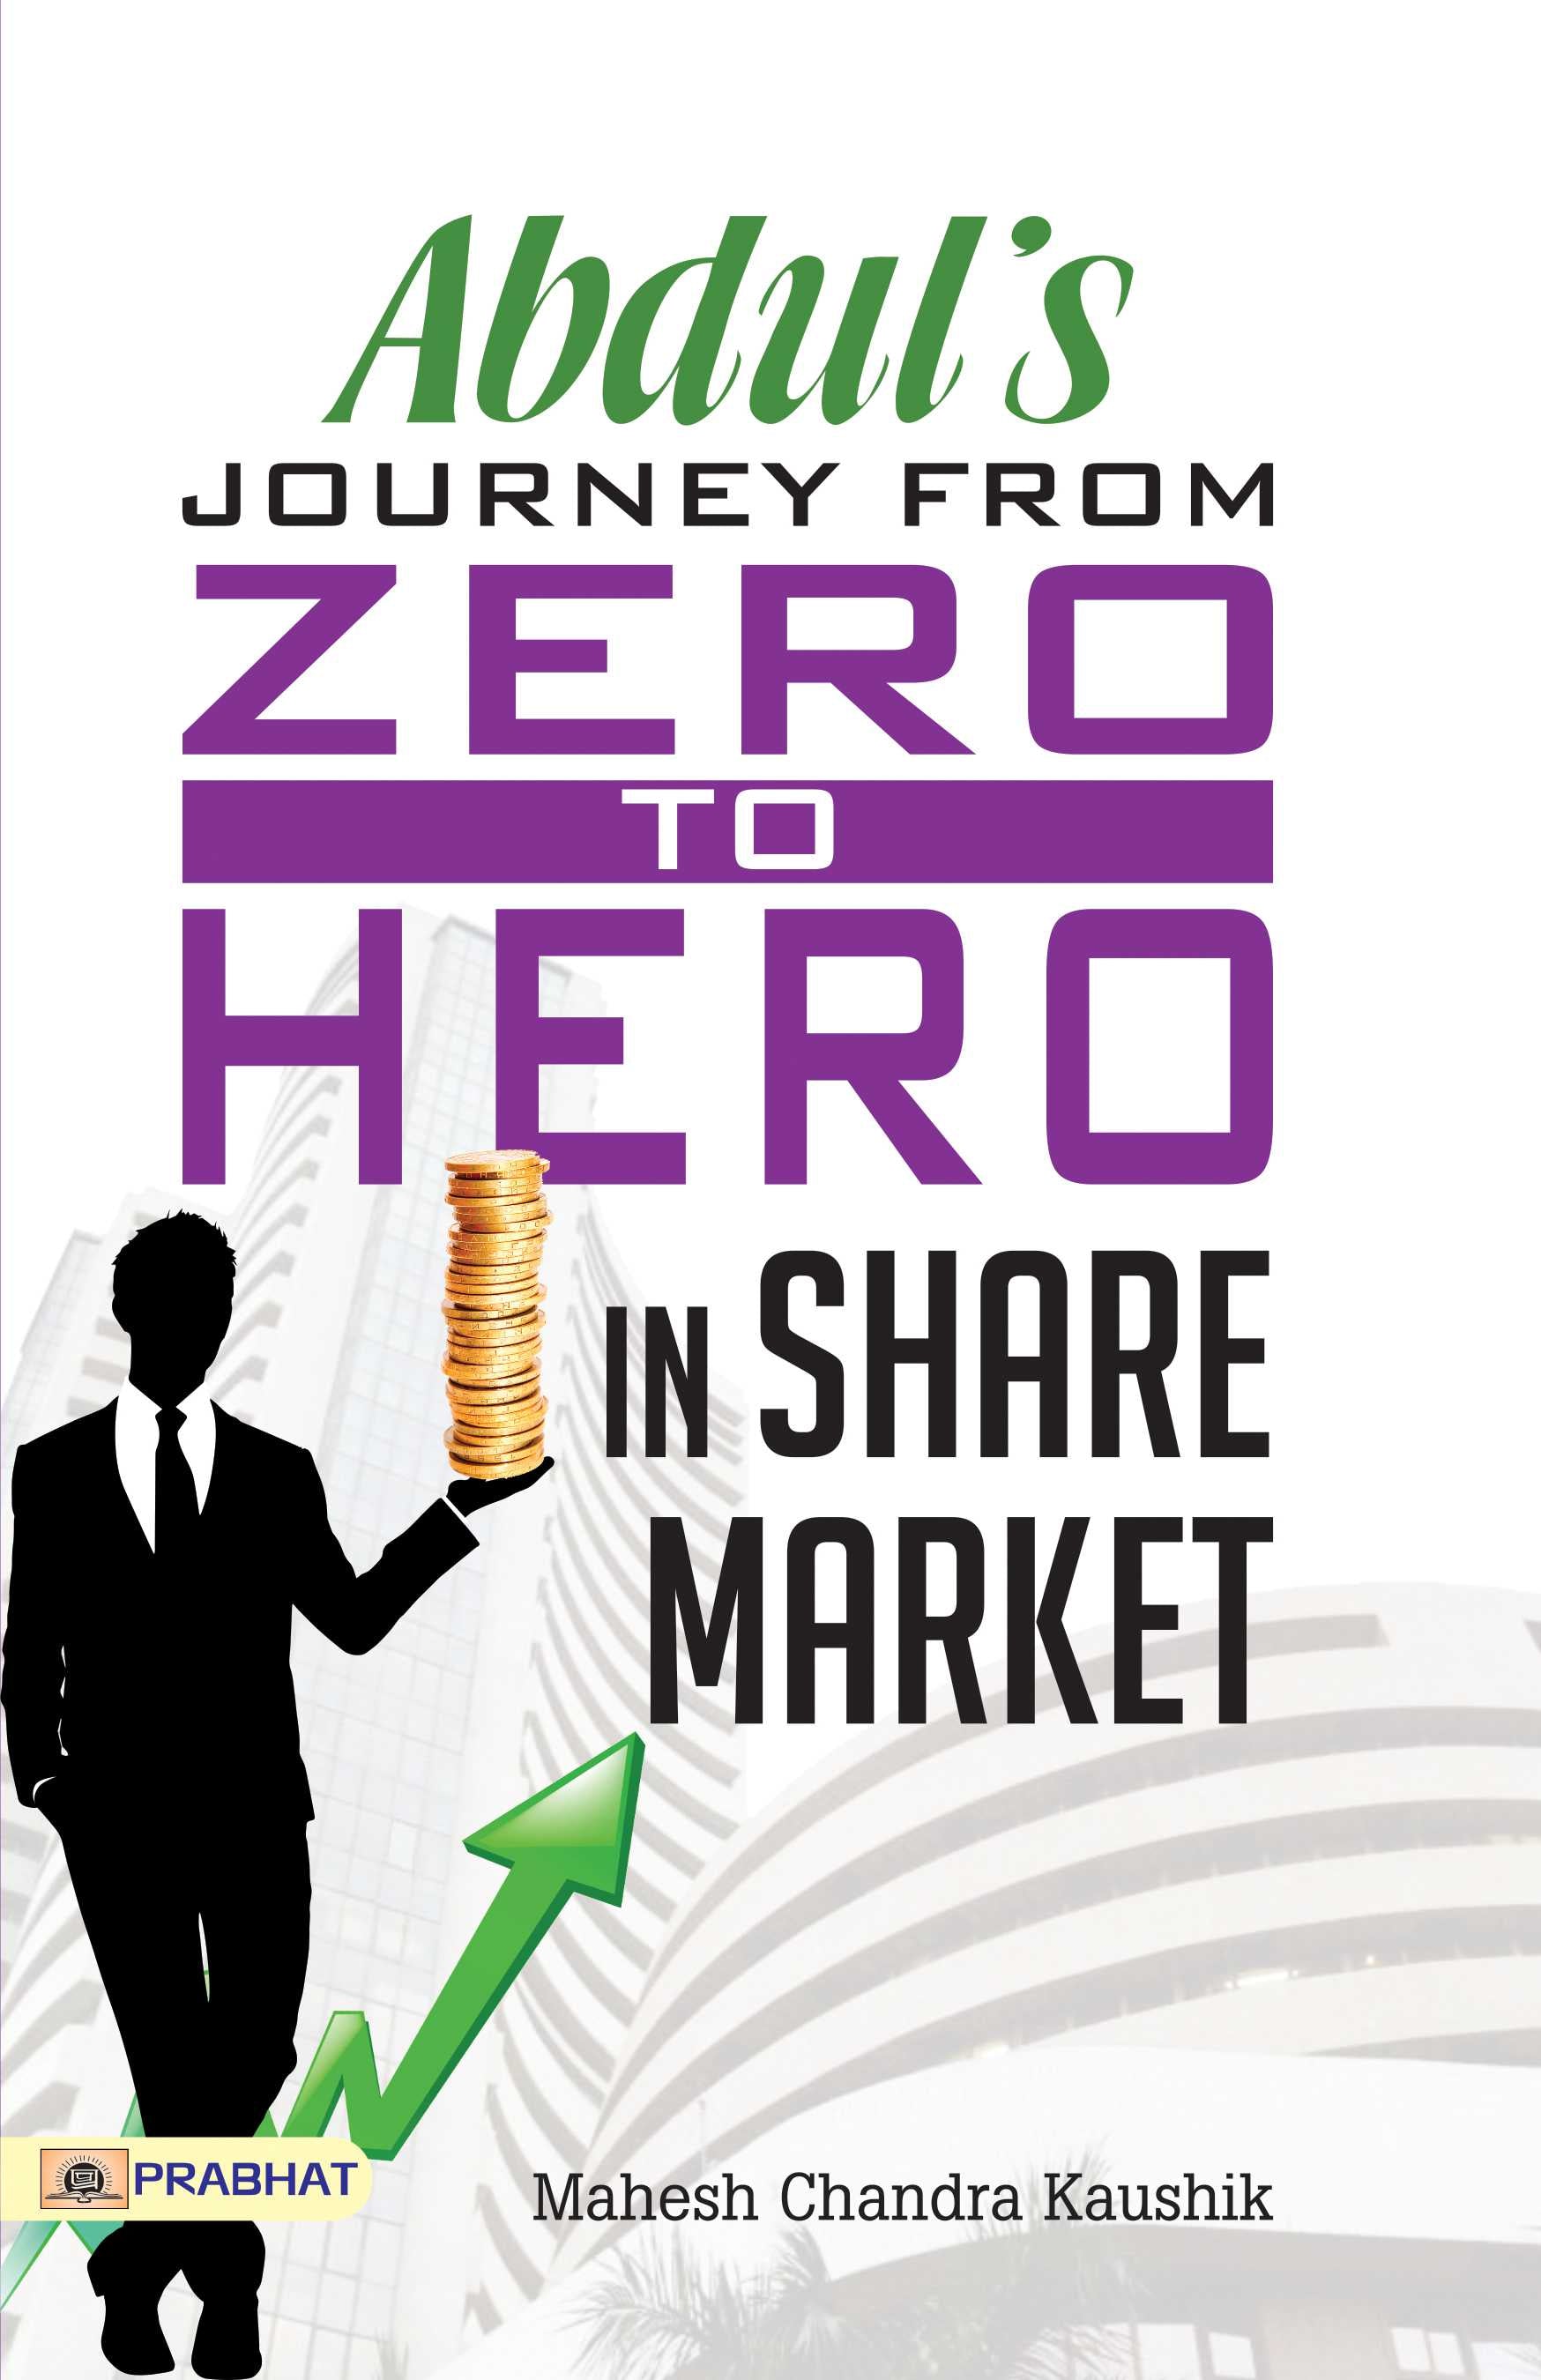 Abdul Journey from Zero to Heroin the Share Market